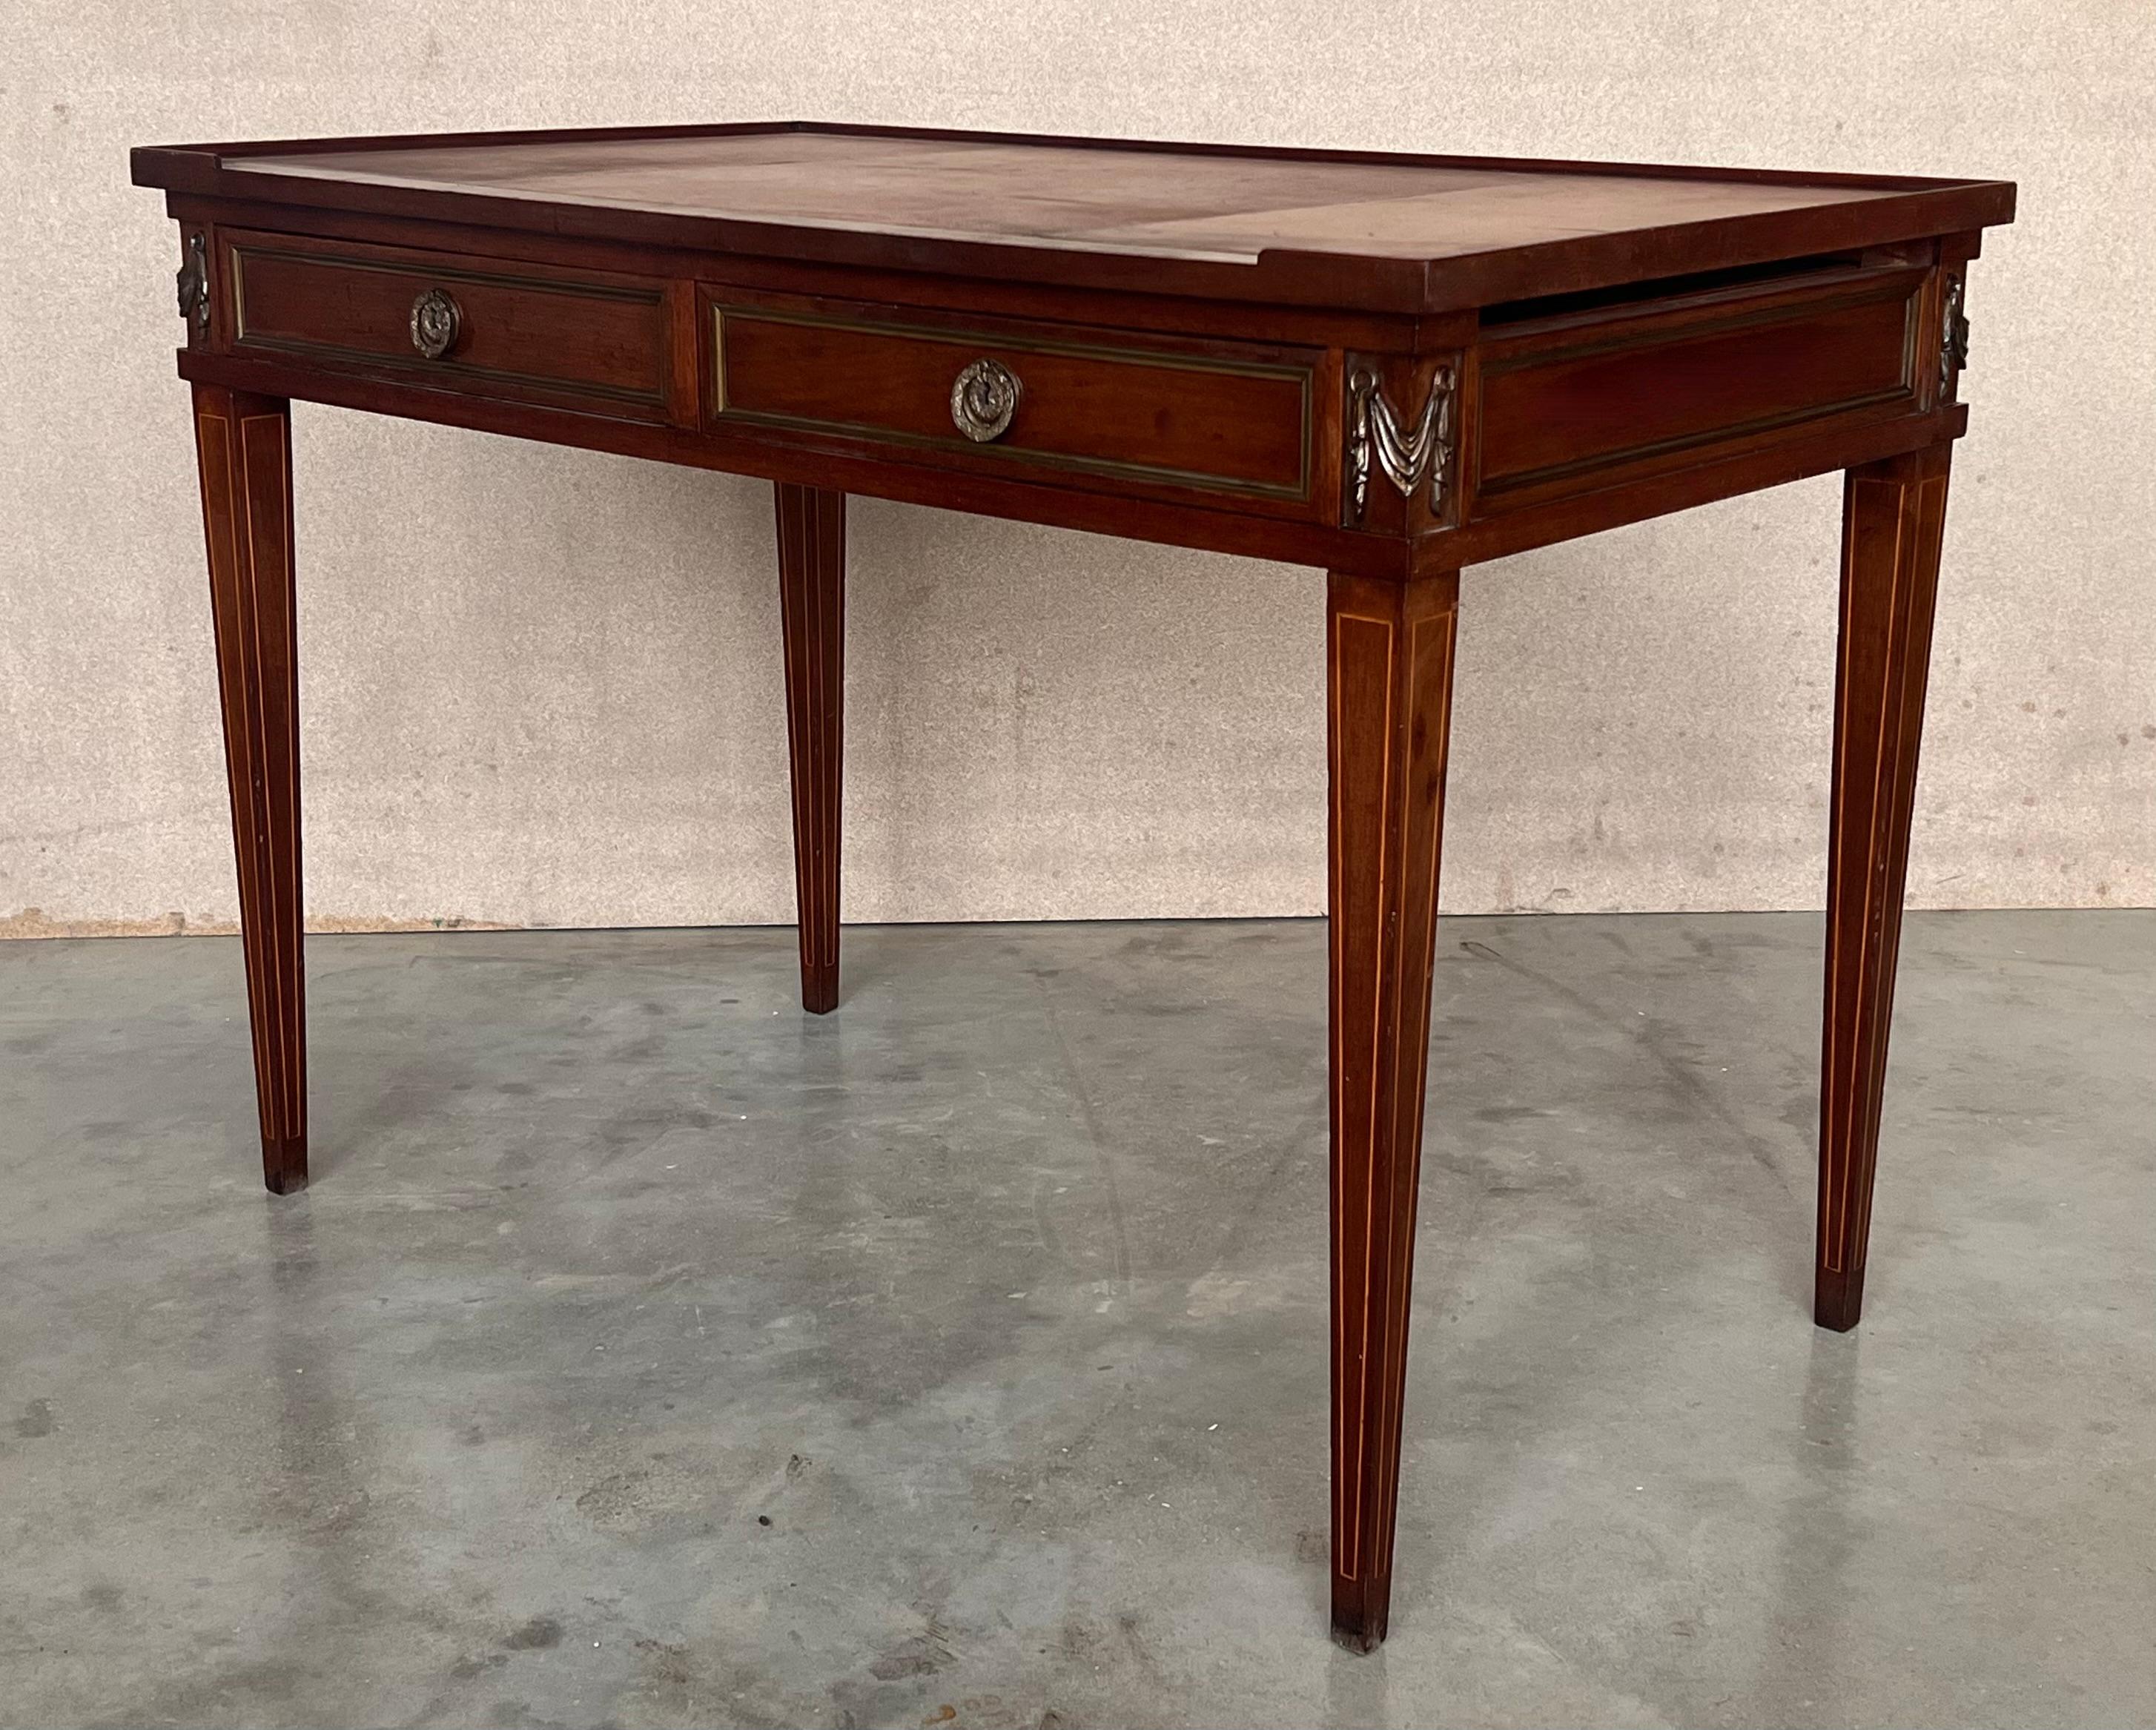 20th Century French Empire style mahogany bronze mounted writing desk, leather top circa 1940 For Sale